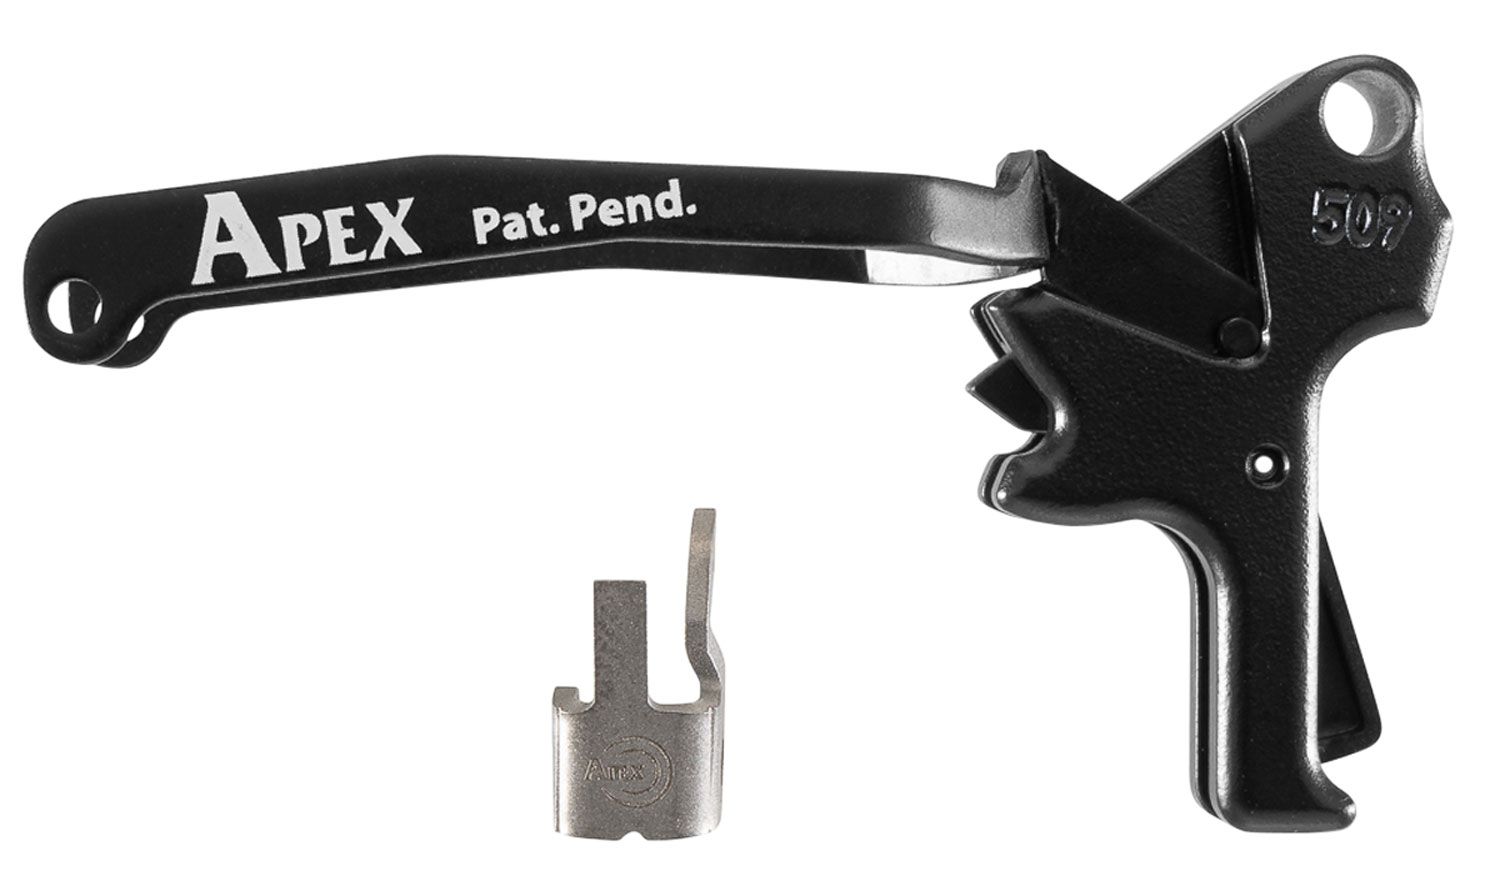 Apex Tactical 119125 Action Enhancement Trigger Kit Drop-in Trigger with 5.50 lbs Draw Weight & Black Finish for FN 509